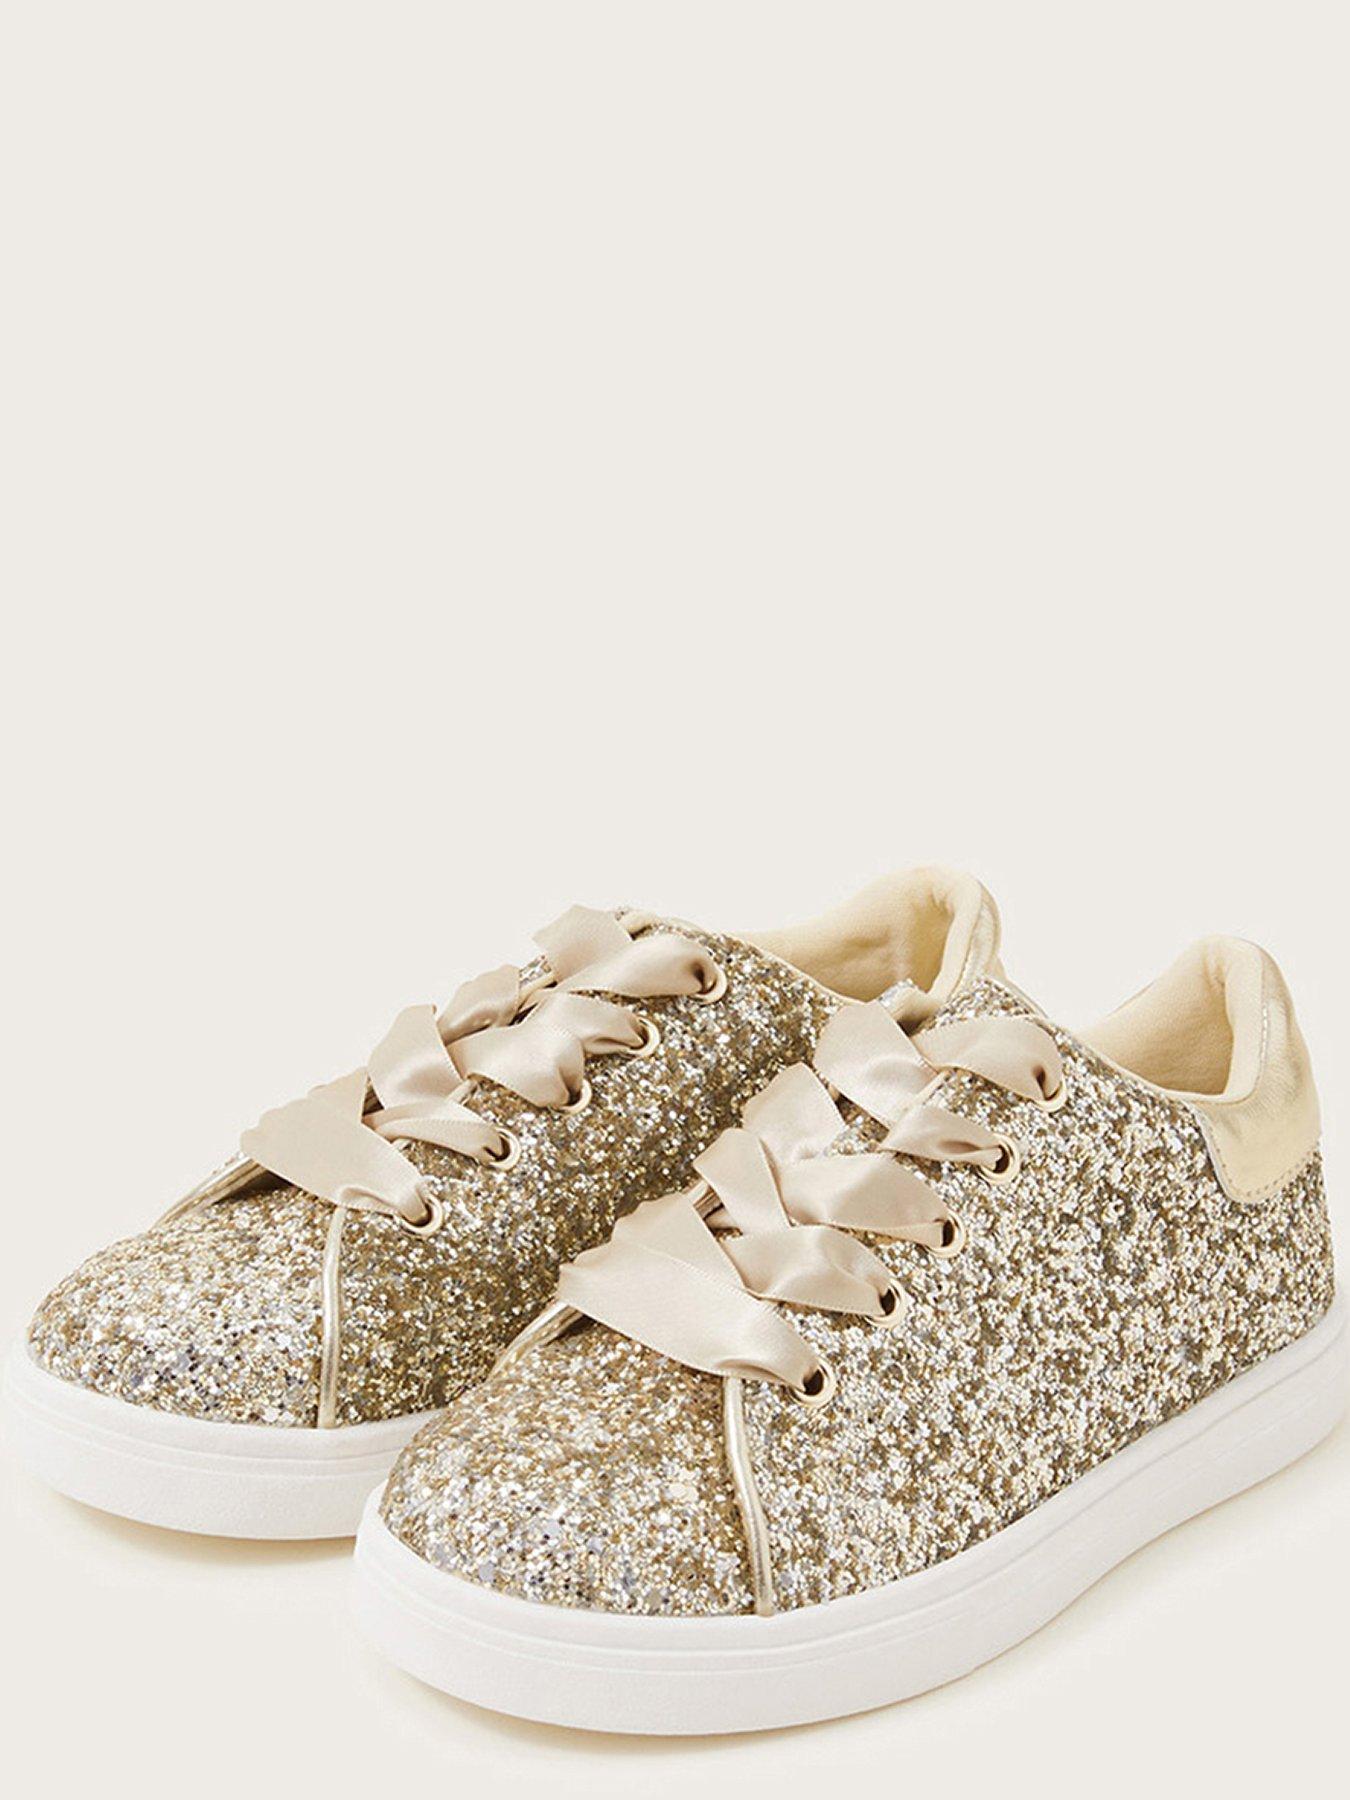 Monsoon Girls Sparkle Glitter Trainers - Gold | very.co.uk